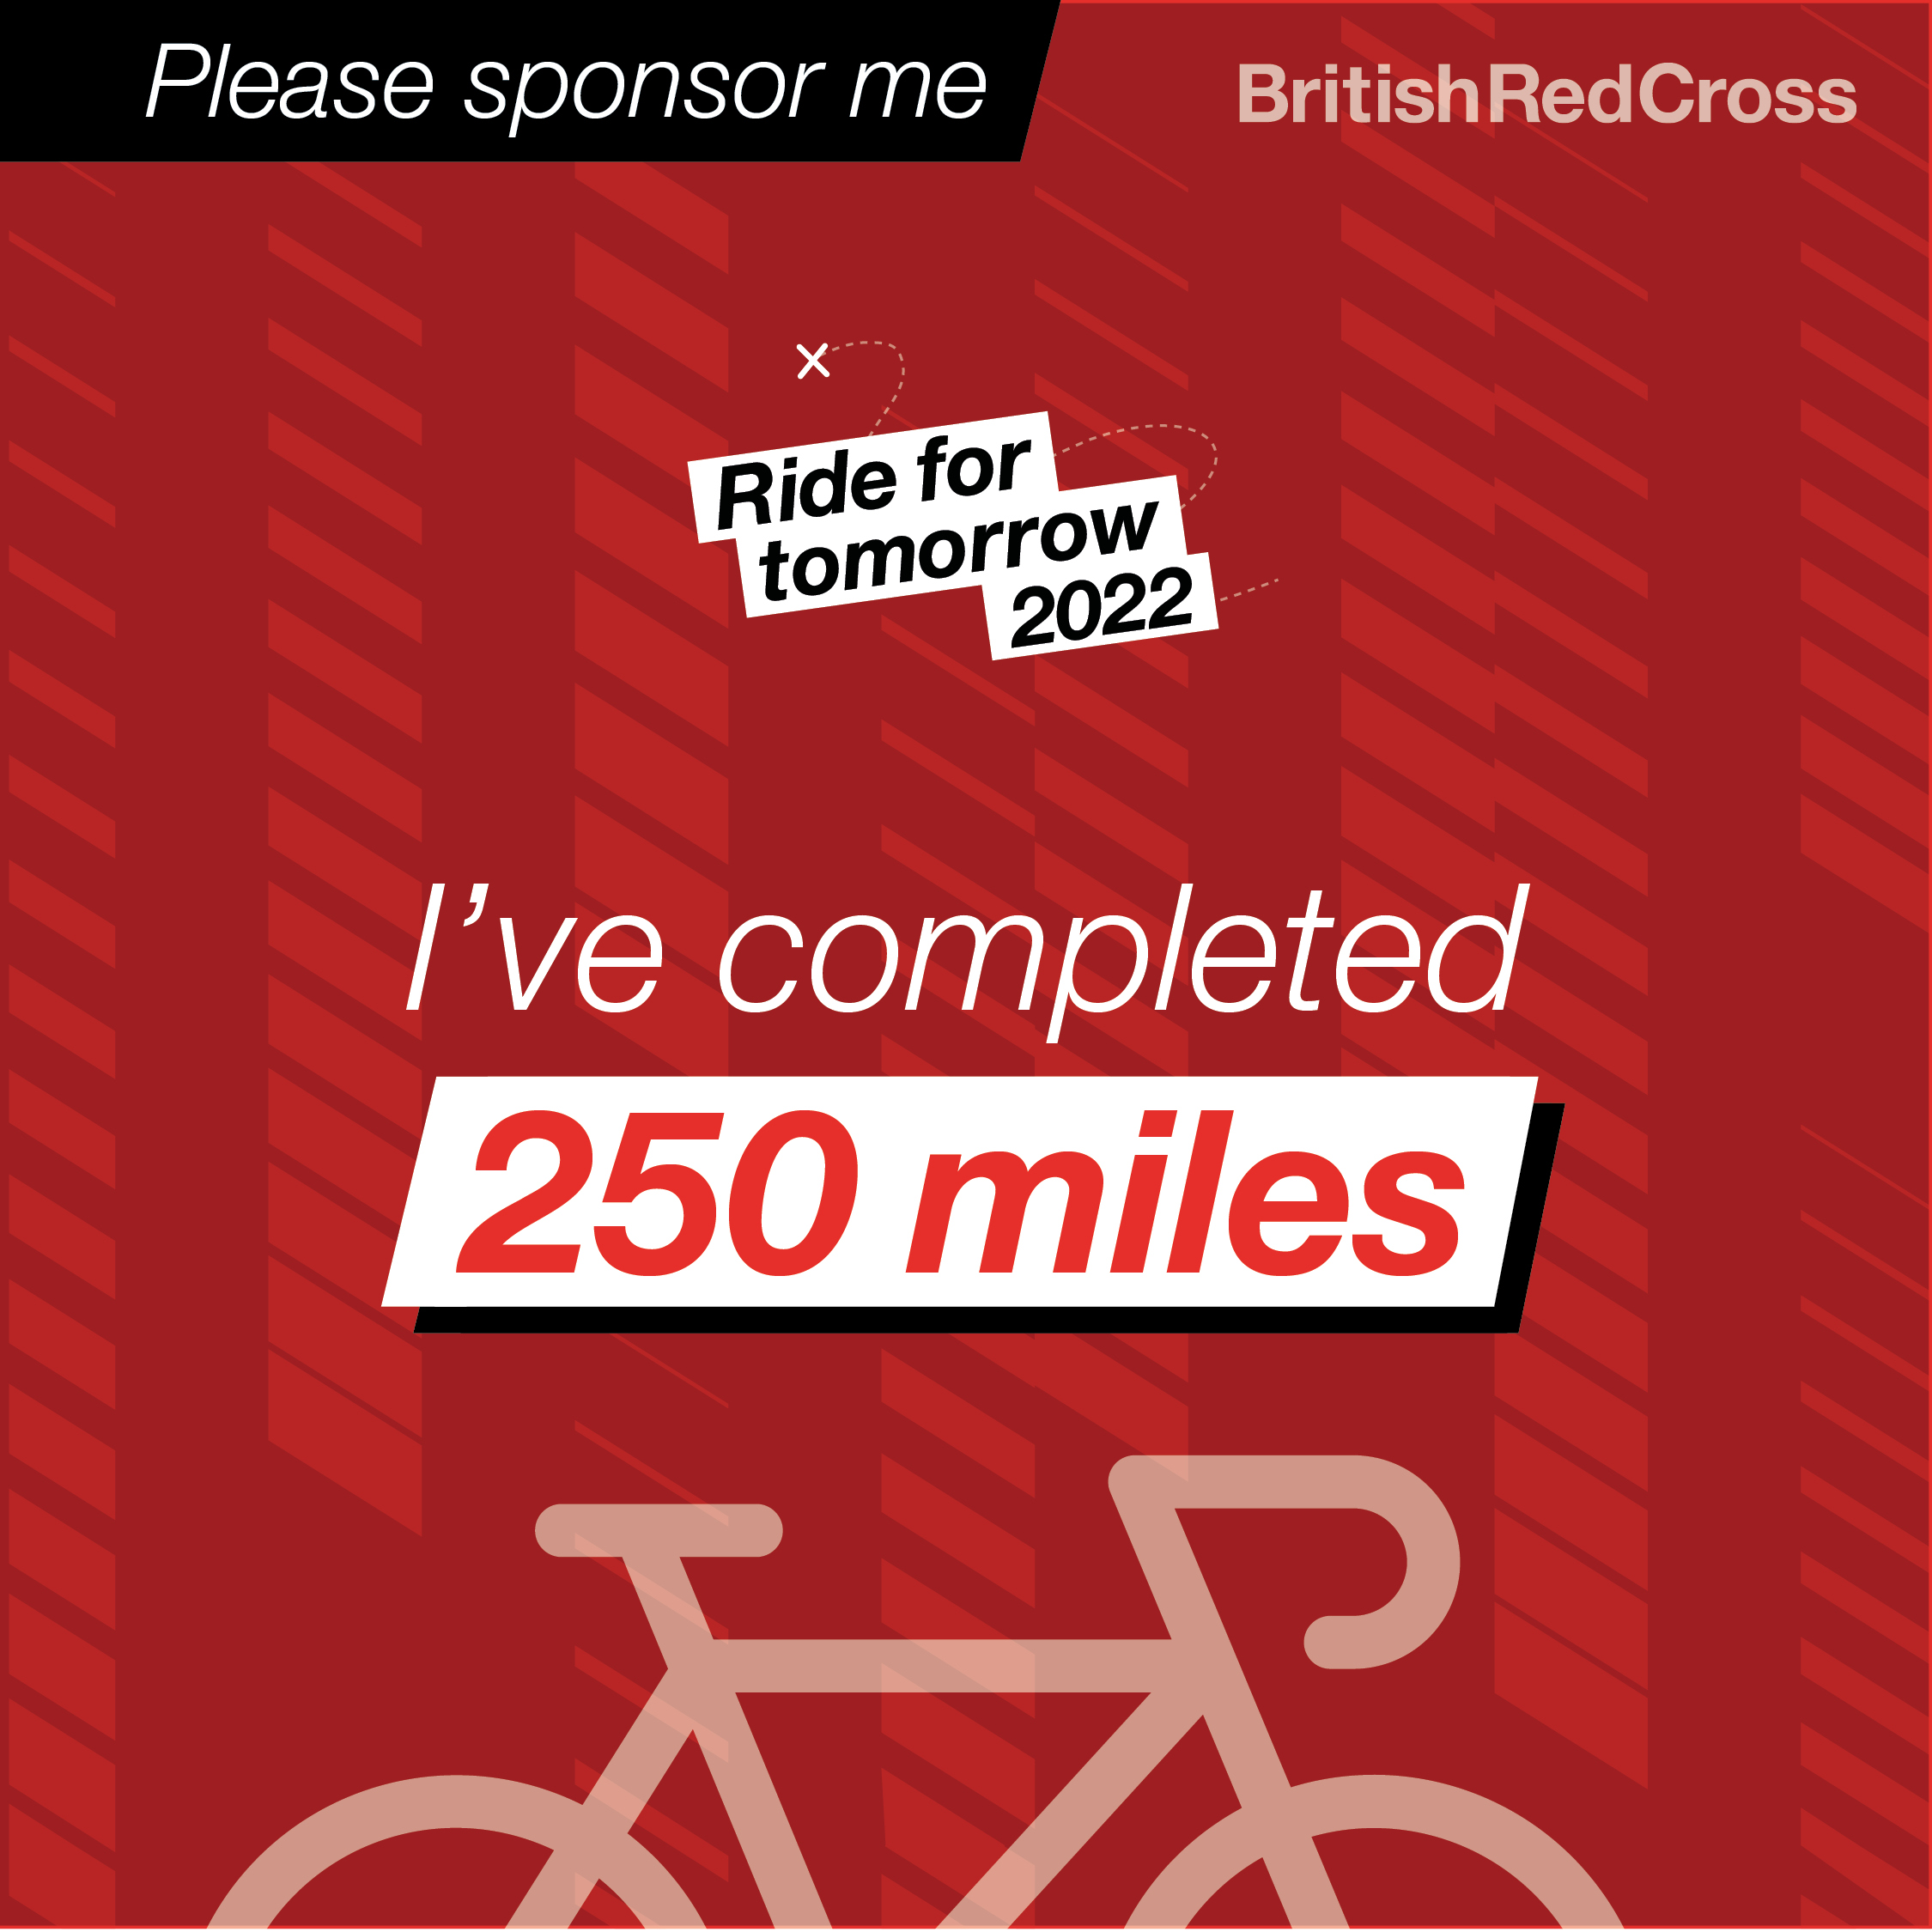 Text on red background: I've completed 250 miles, please sponsor me